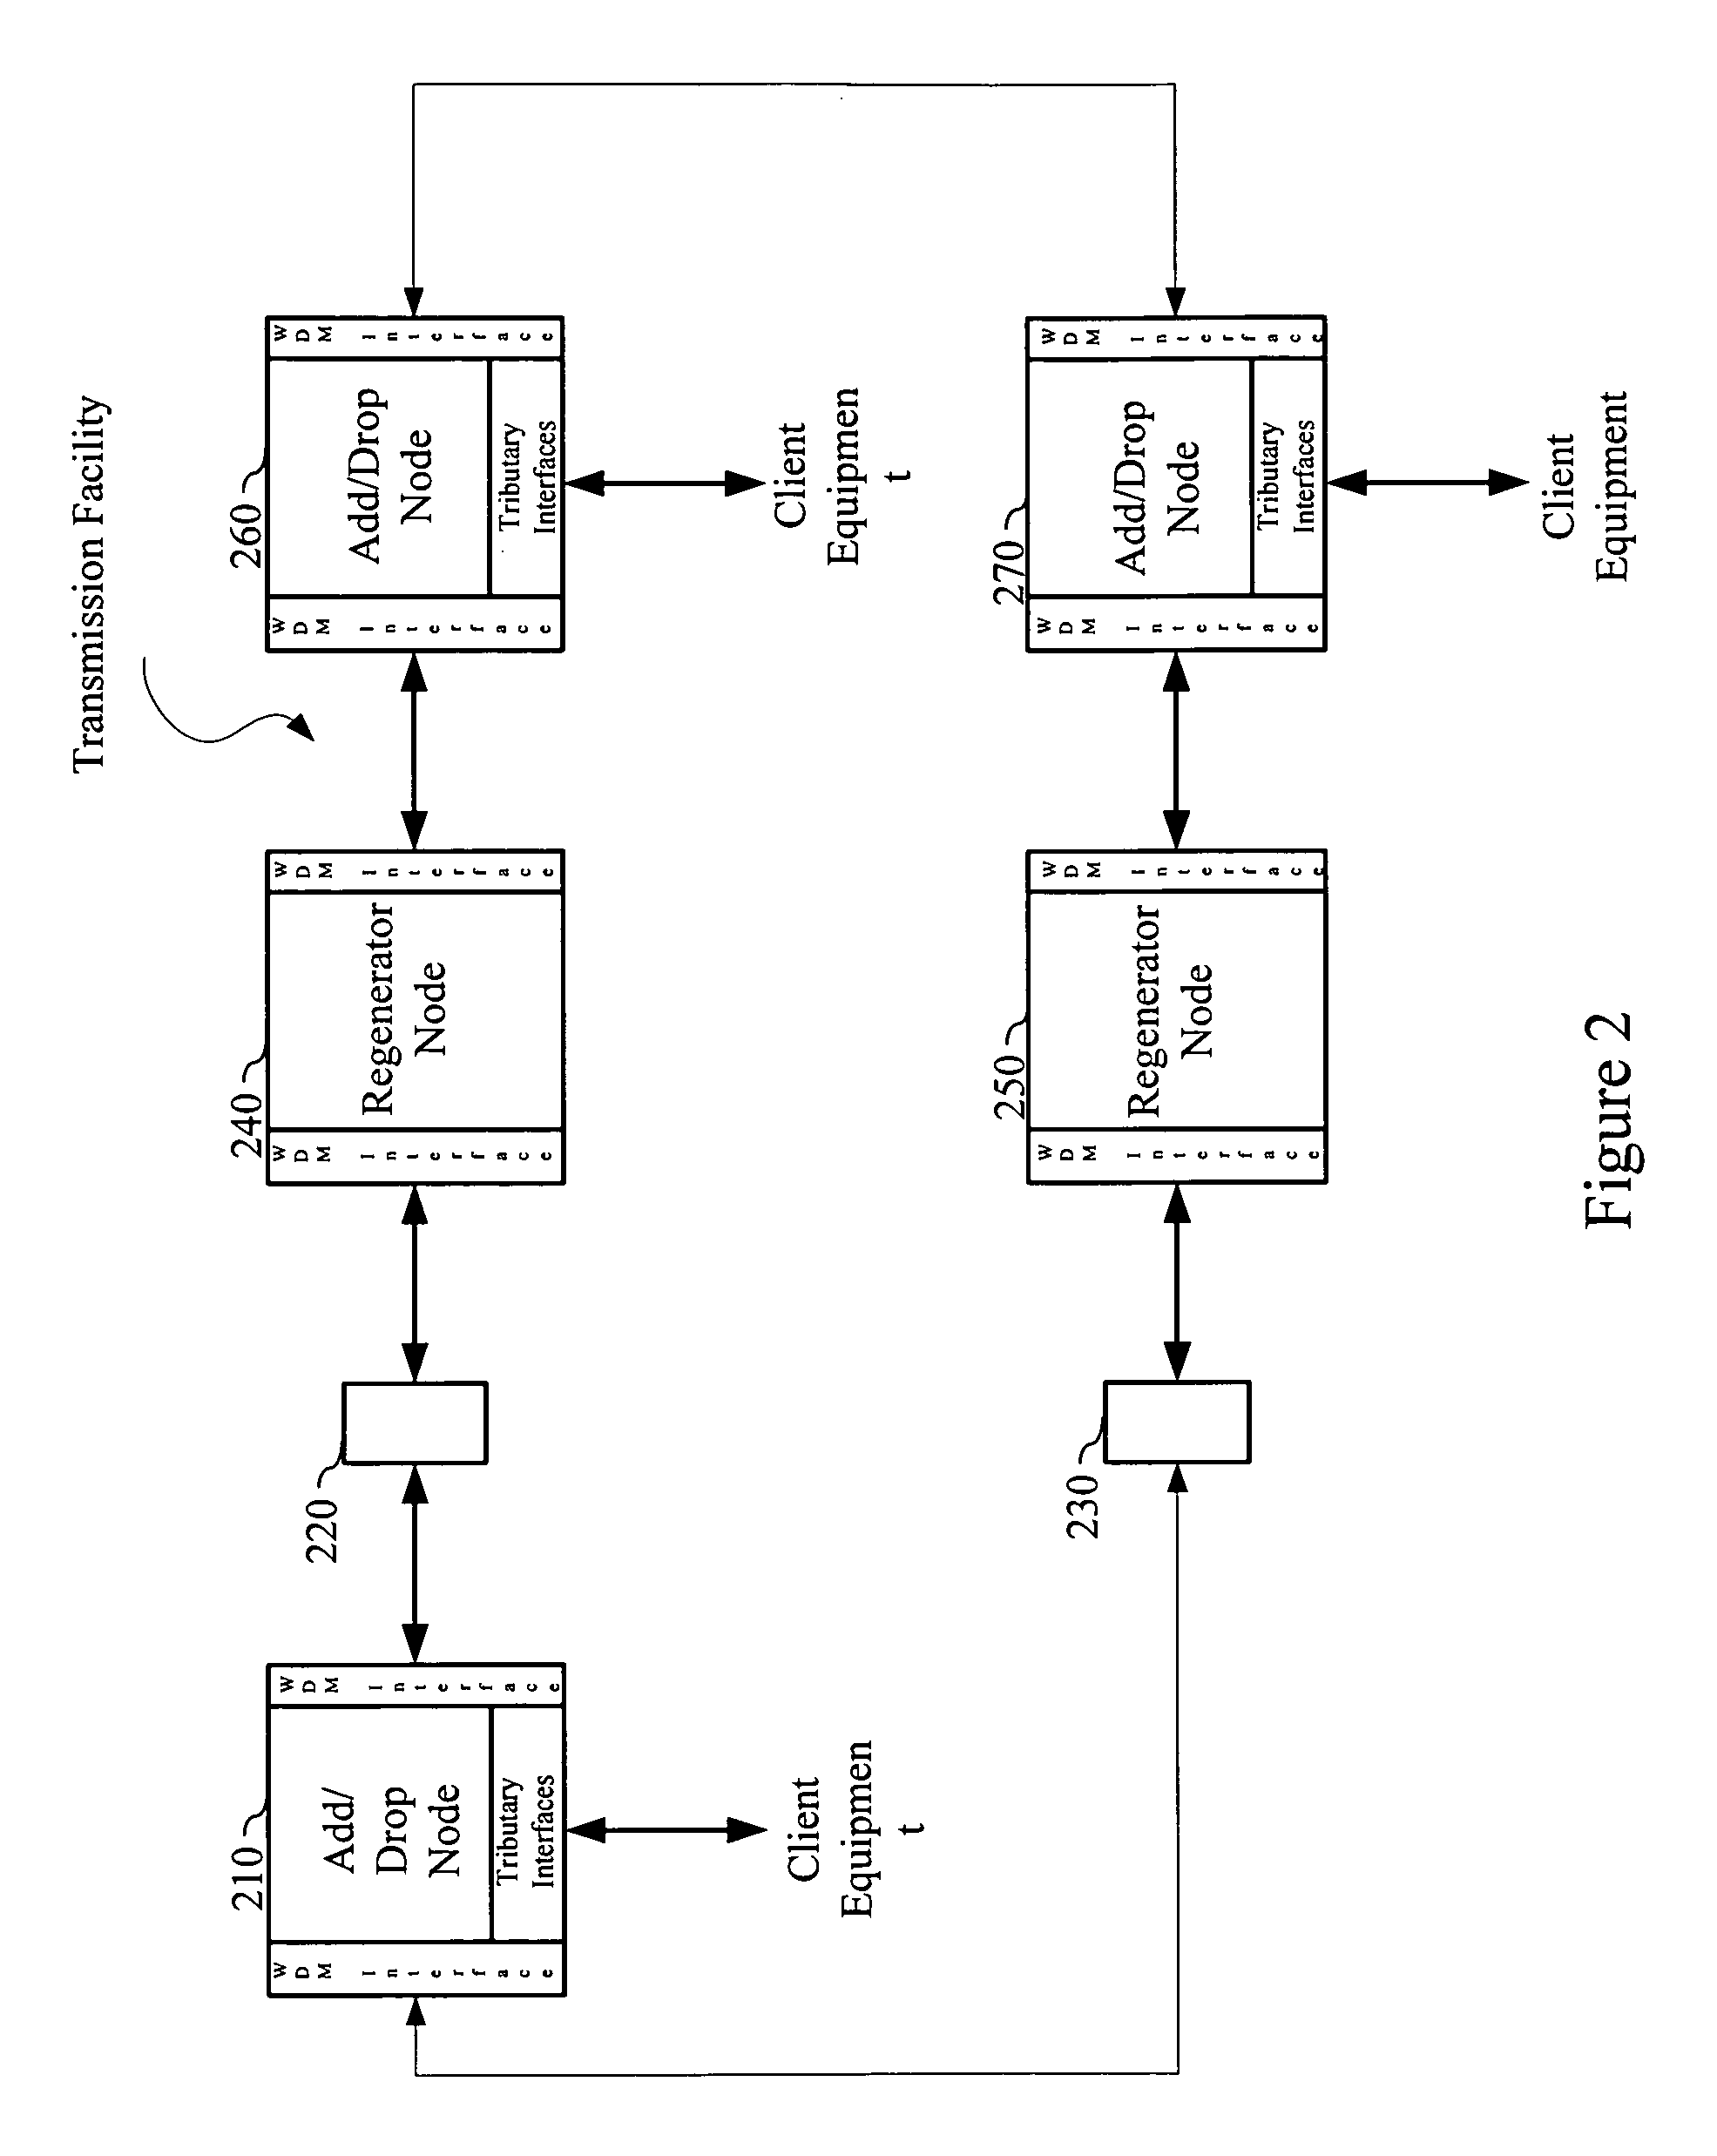 Modular adaptation and configuration of a nework node architecture